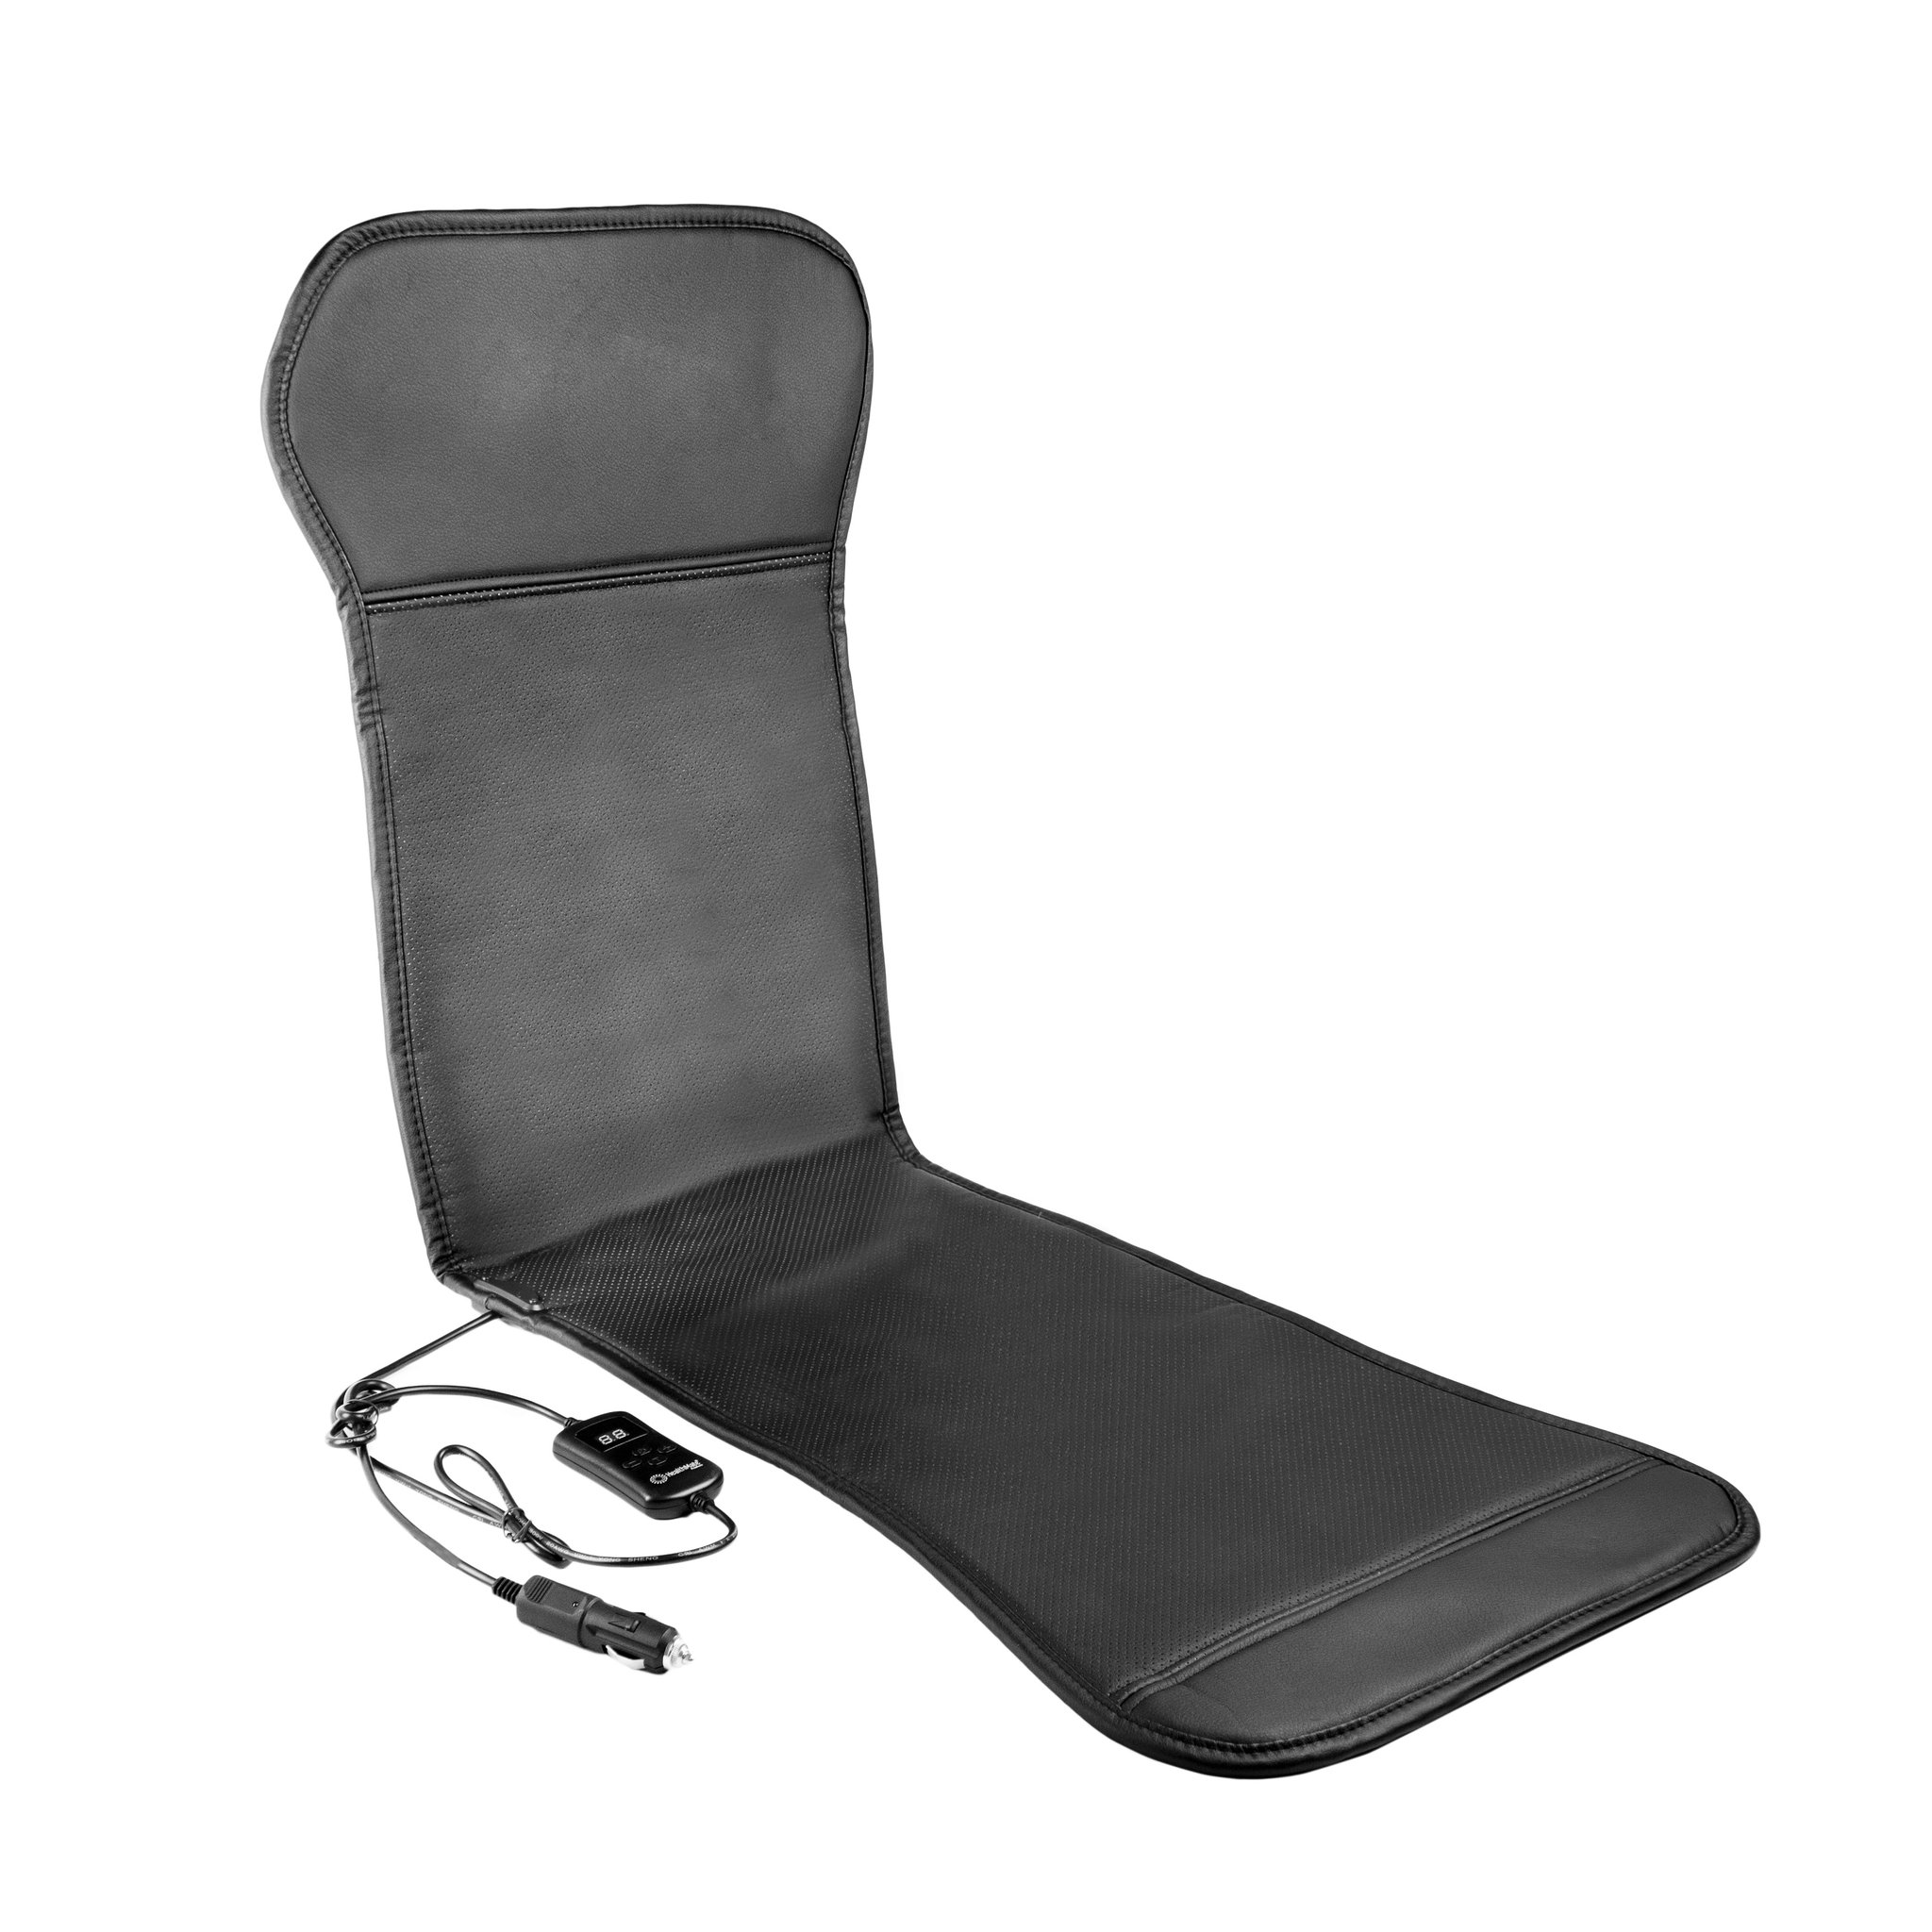 https://op2.0ps.us/original/opplanet-wagan-auto-sport-heated-seat-cushion-black-one-size-in9449-main